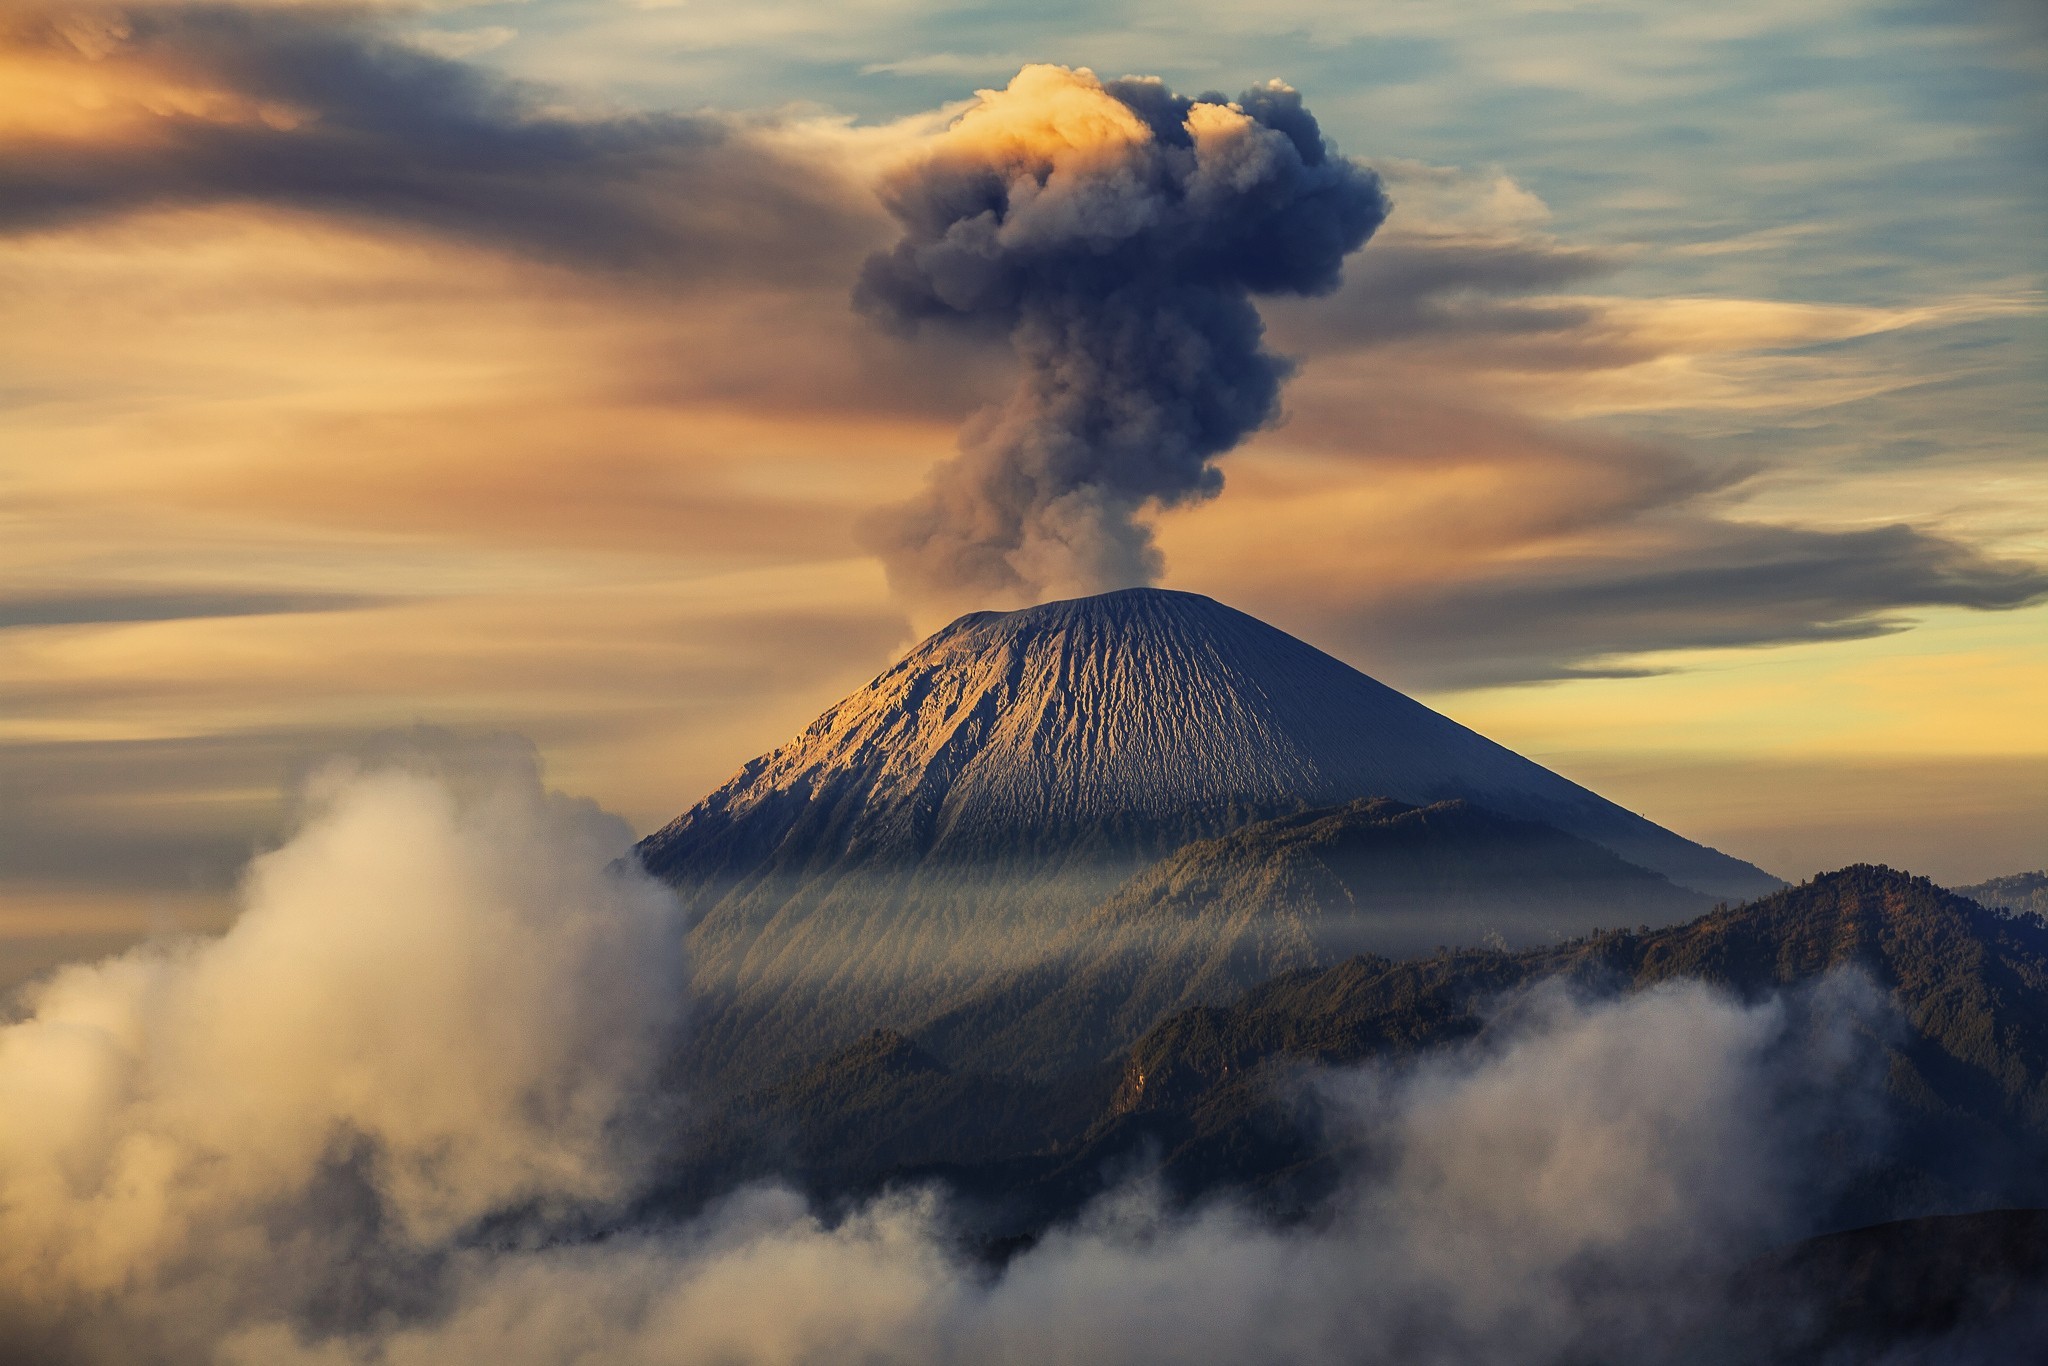 General 2048x1366 landscape stratovolcano eruptions mountains Indonesia nature Mount Bromo